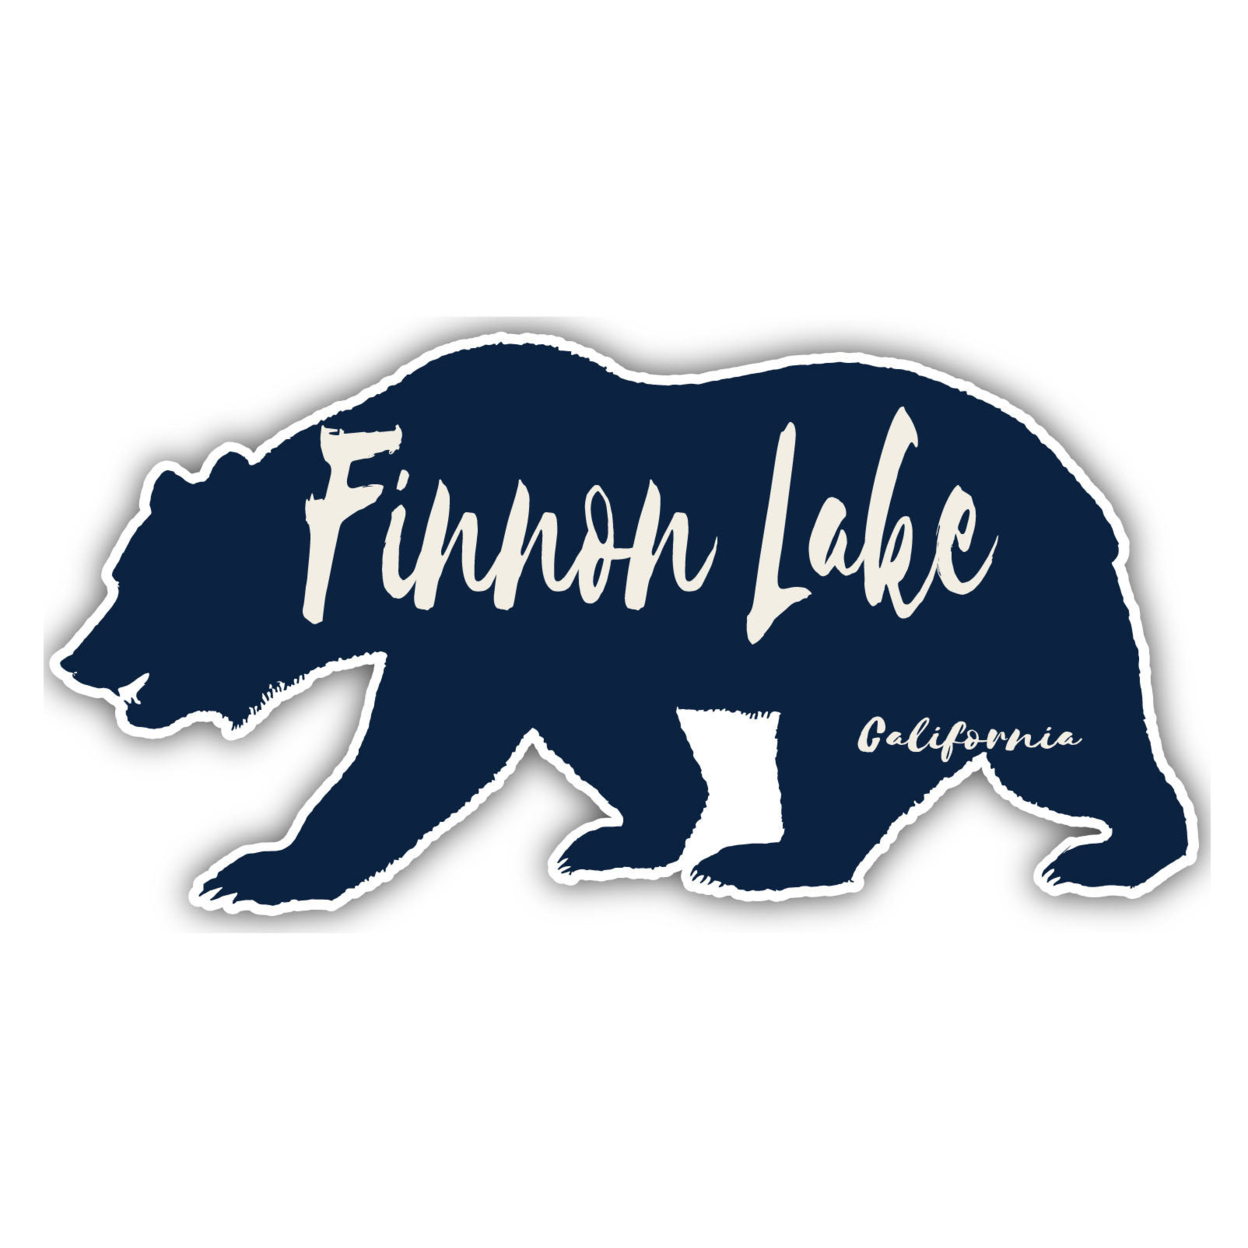 Finnon Lake California Souvenir Decorative Stickers (Choose Theme And Size) - 4-Pack, 8-Inch, Camp Life